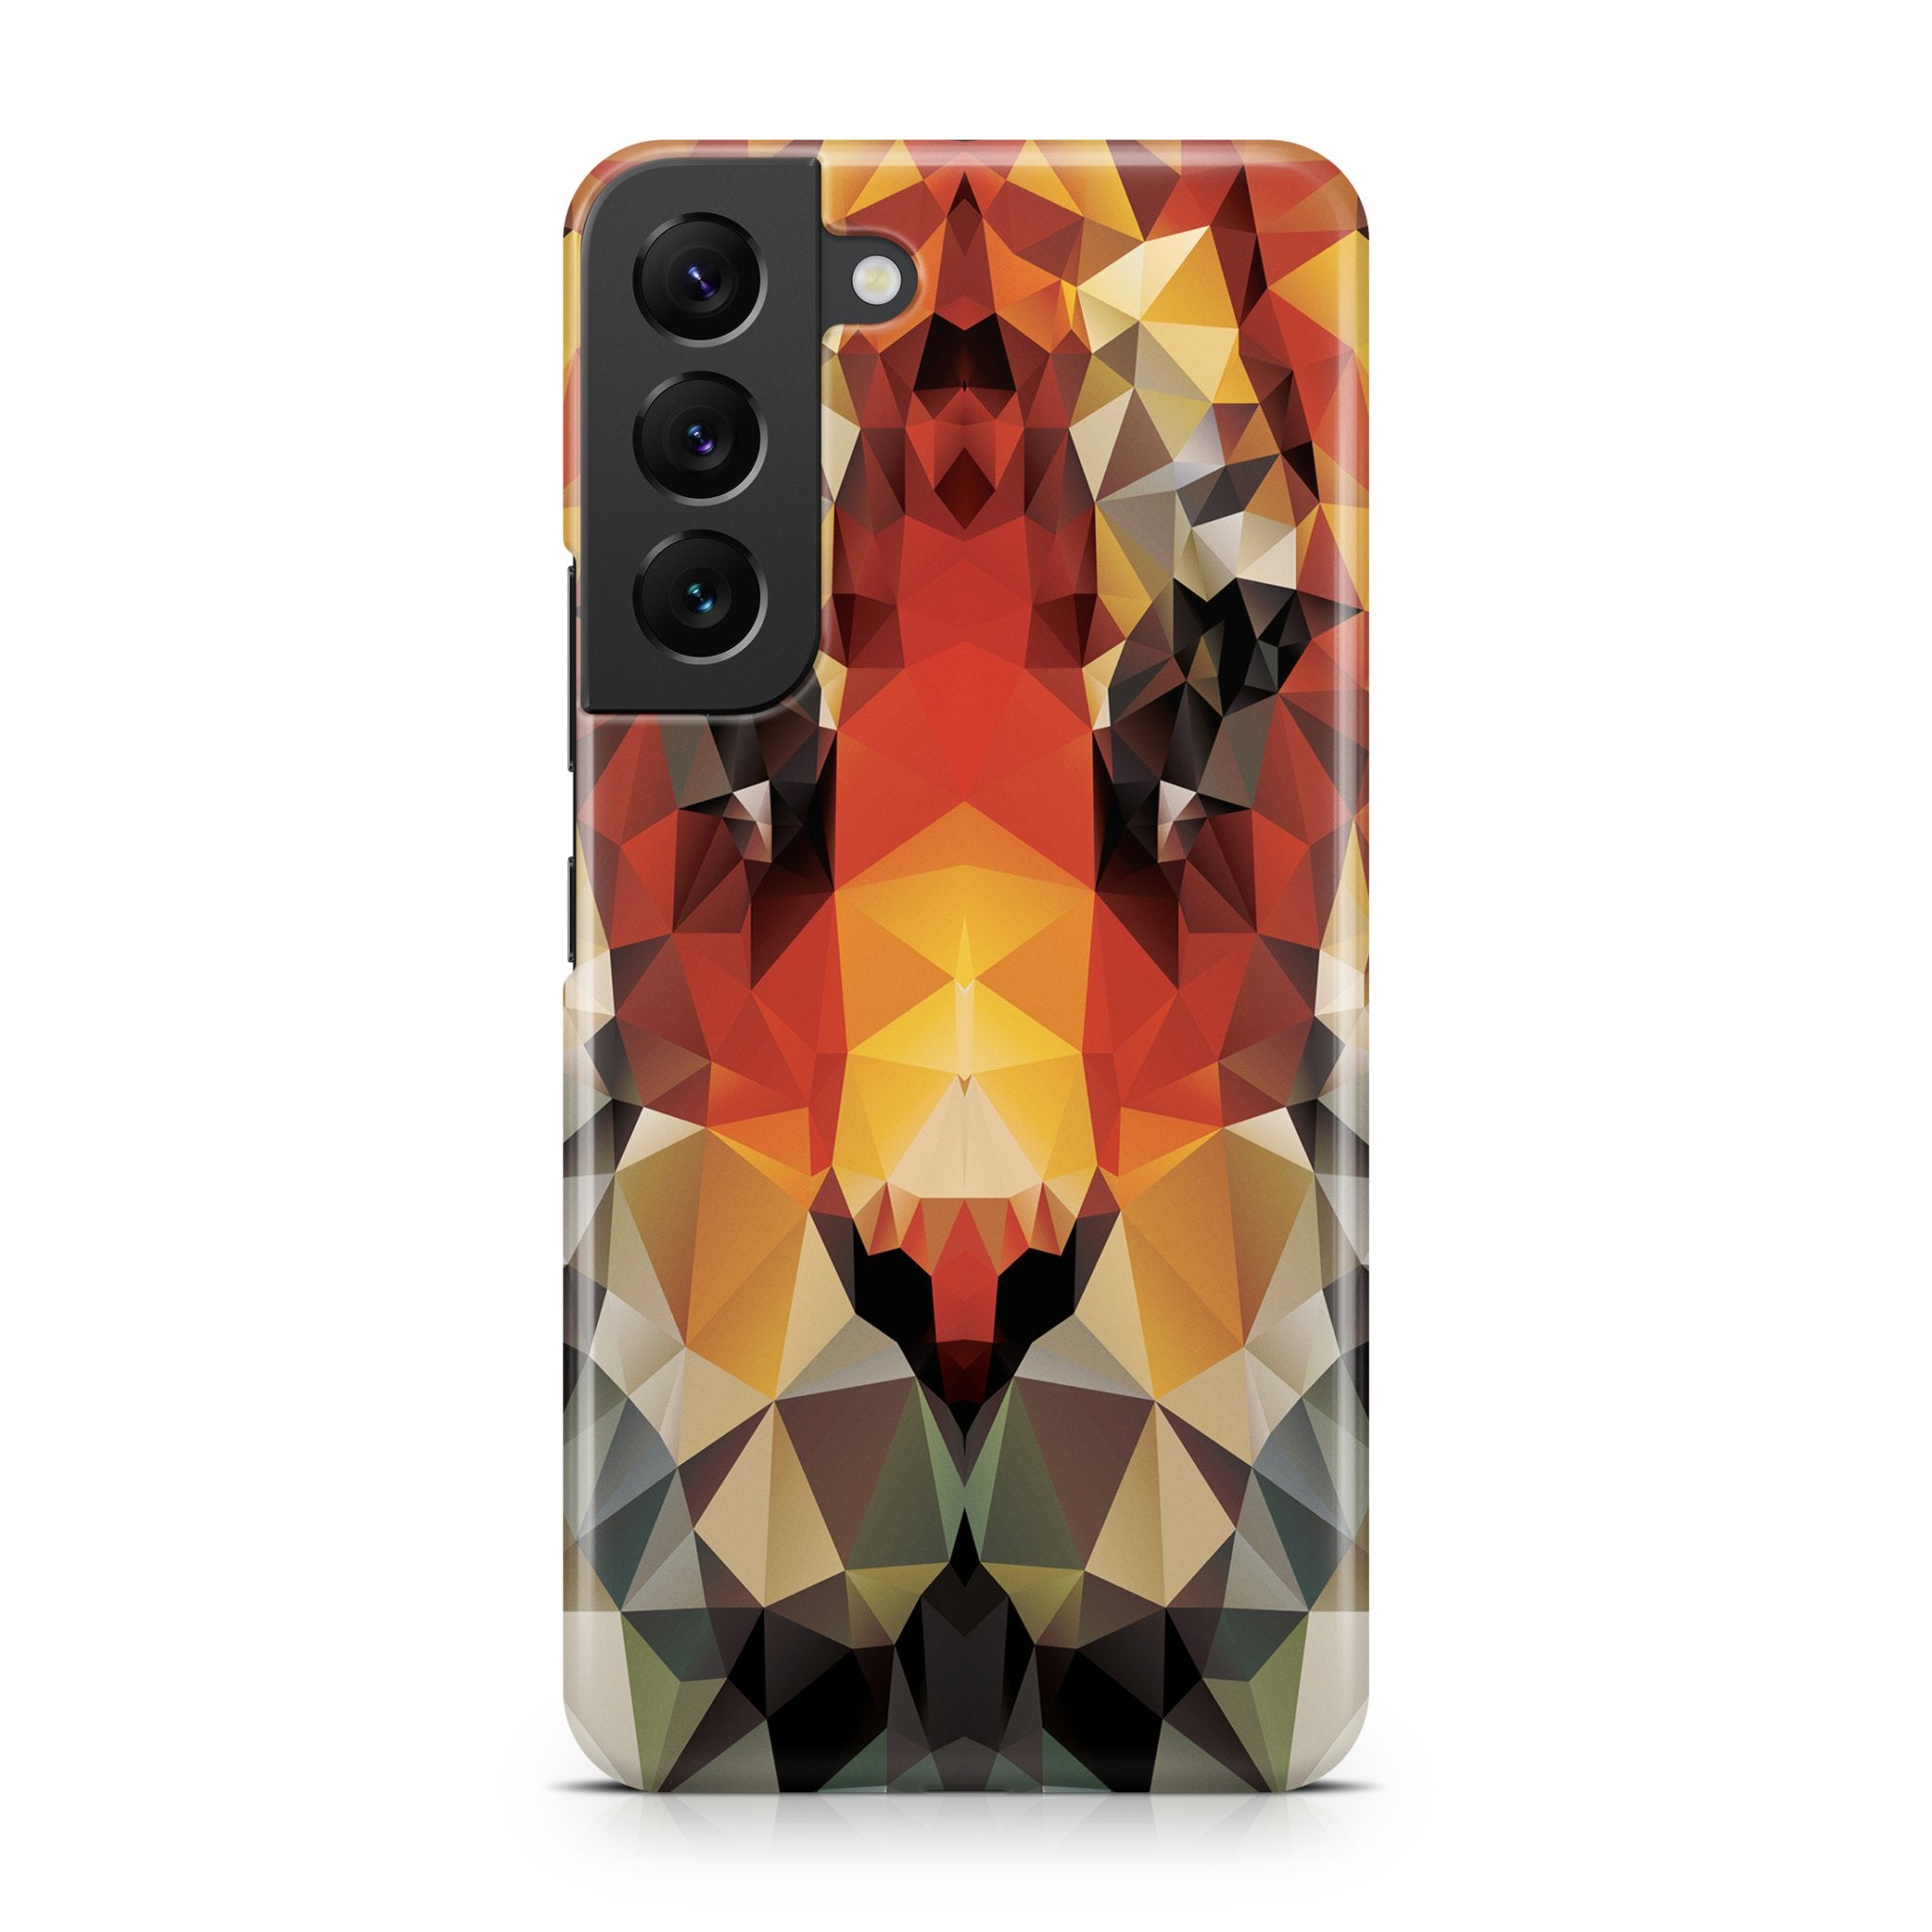 Polygonal Tiger - Samsung phone case designs by CaseSwagger